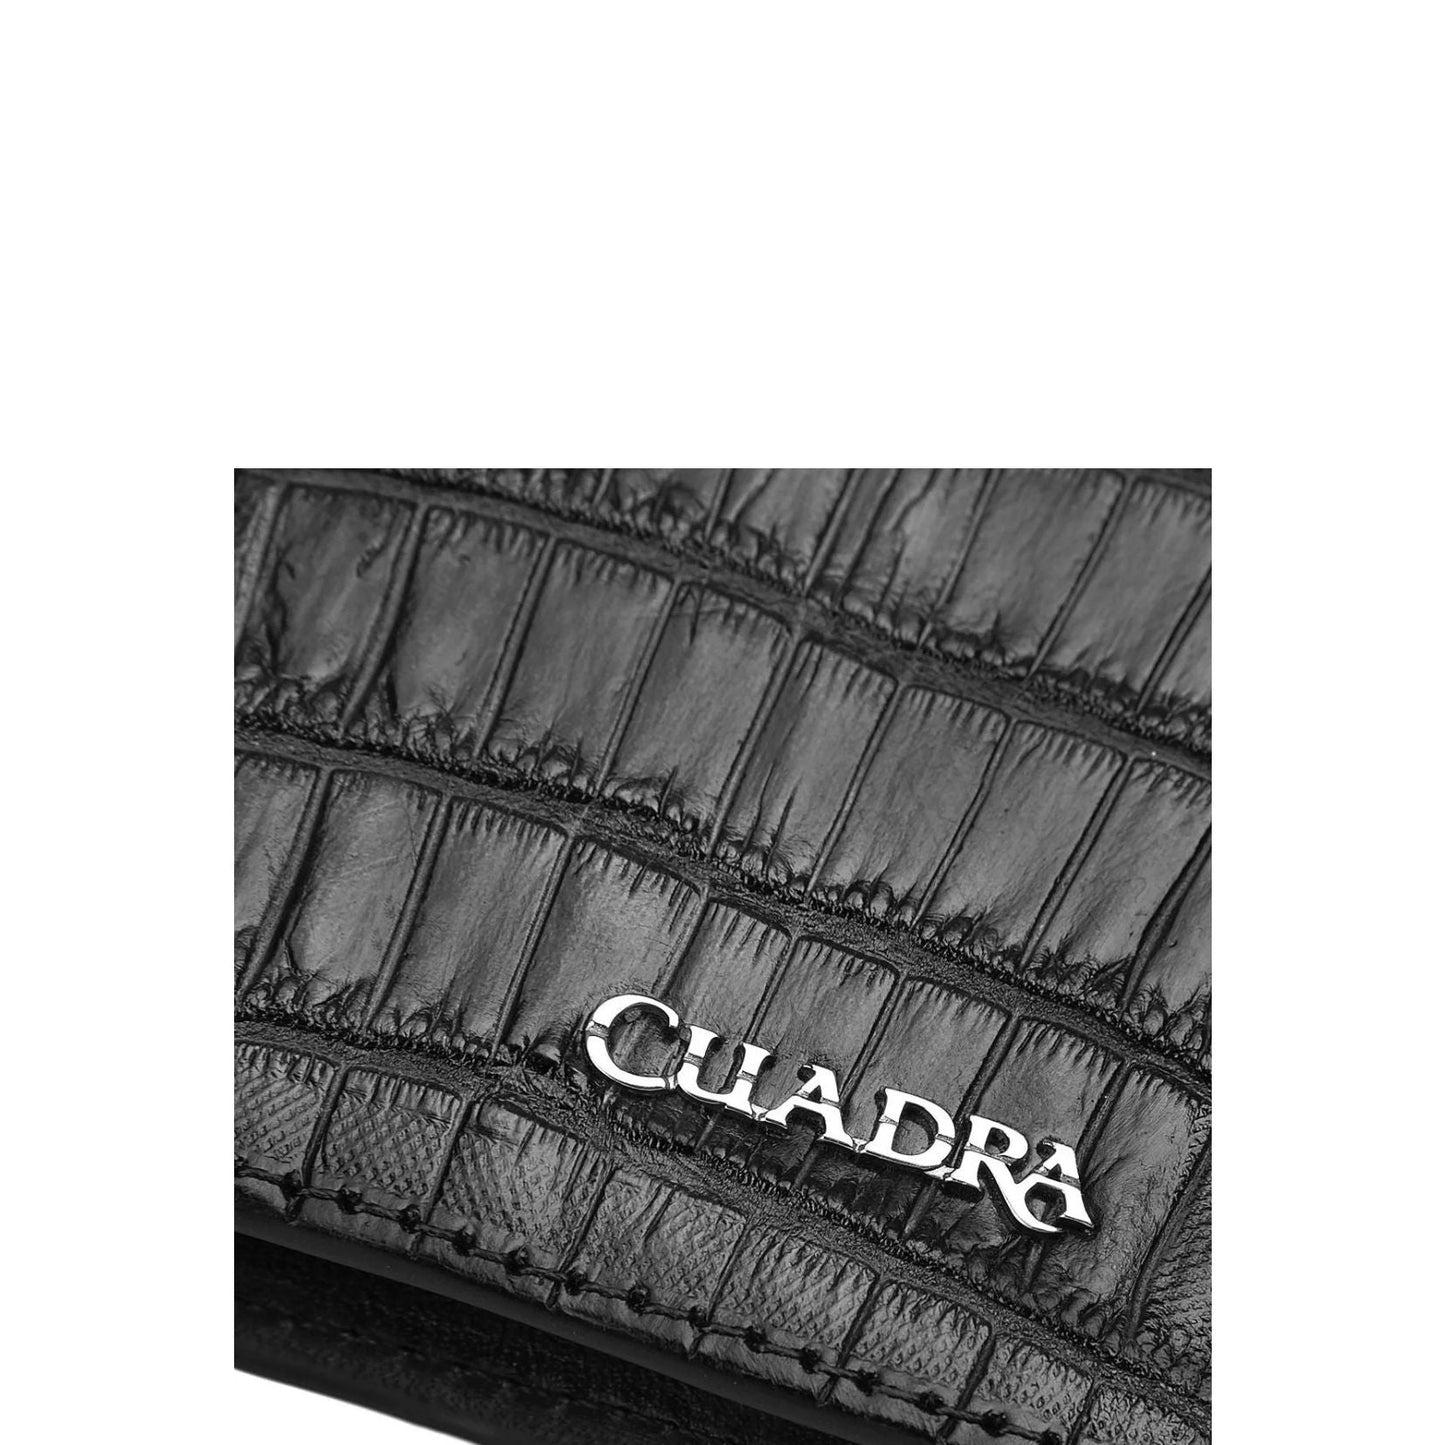 BC011NL - Cuadra black exotic wallet in niloticus leather for men-Kuet.us